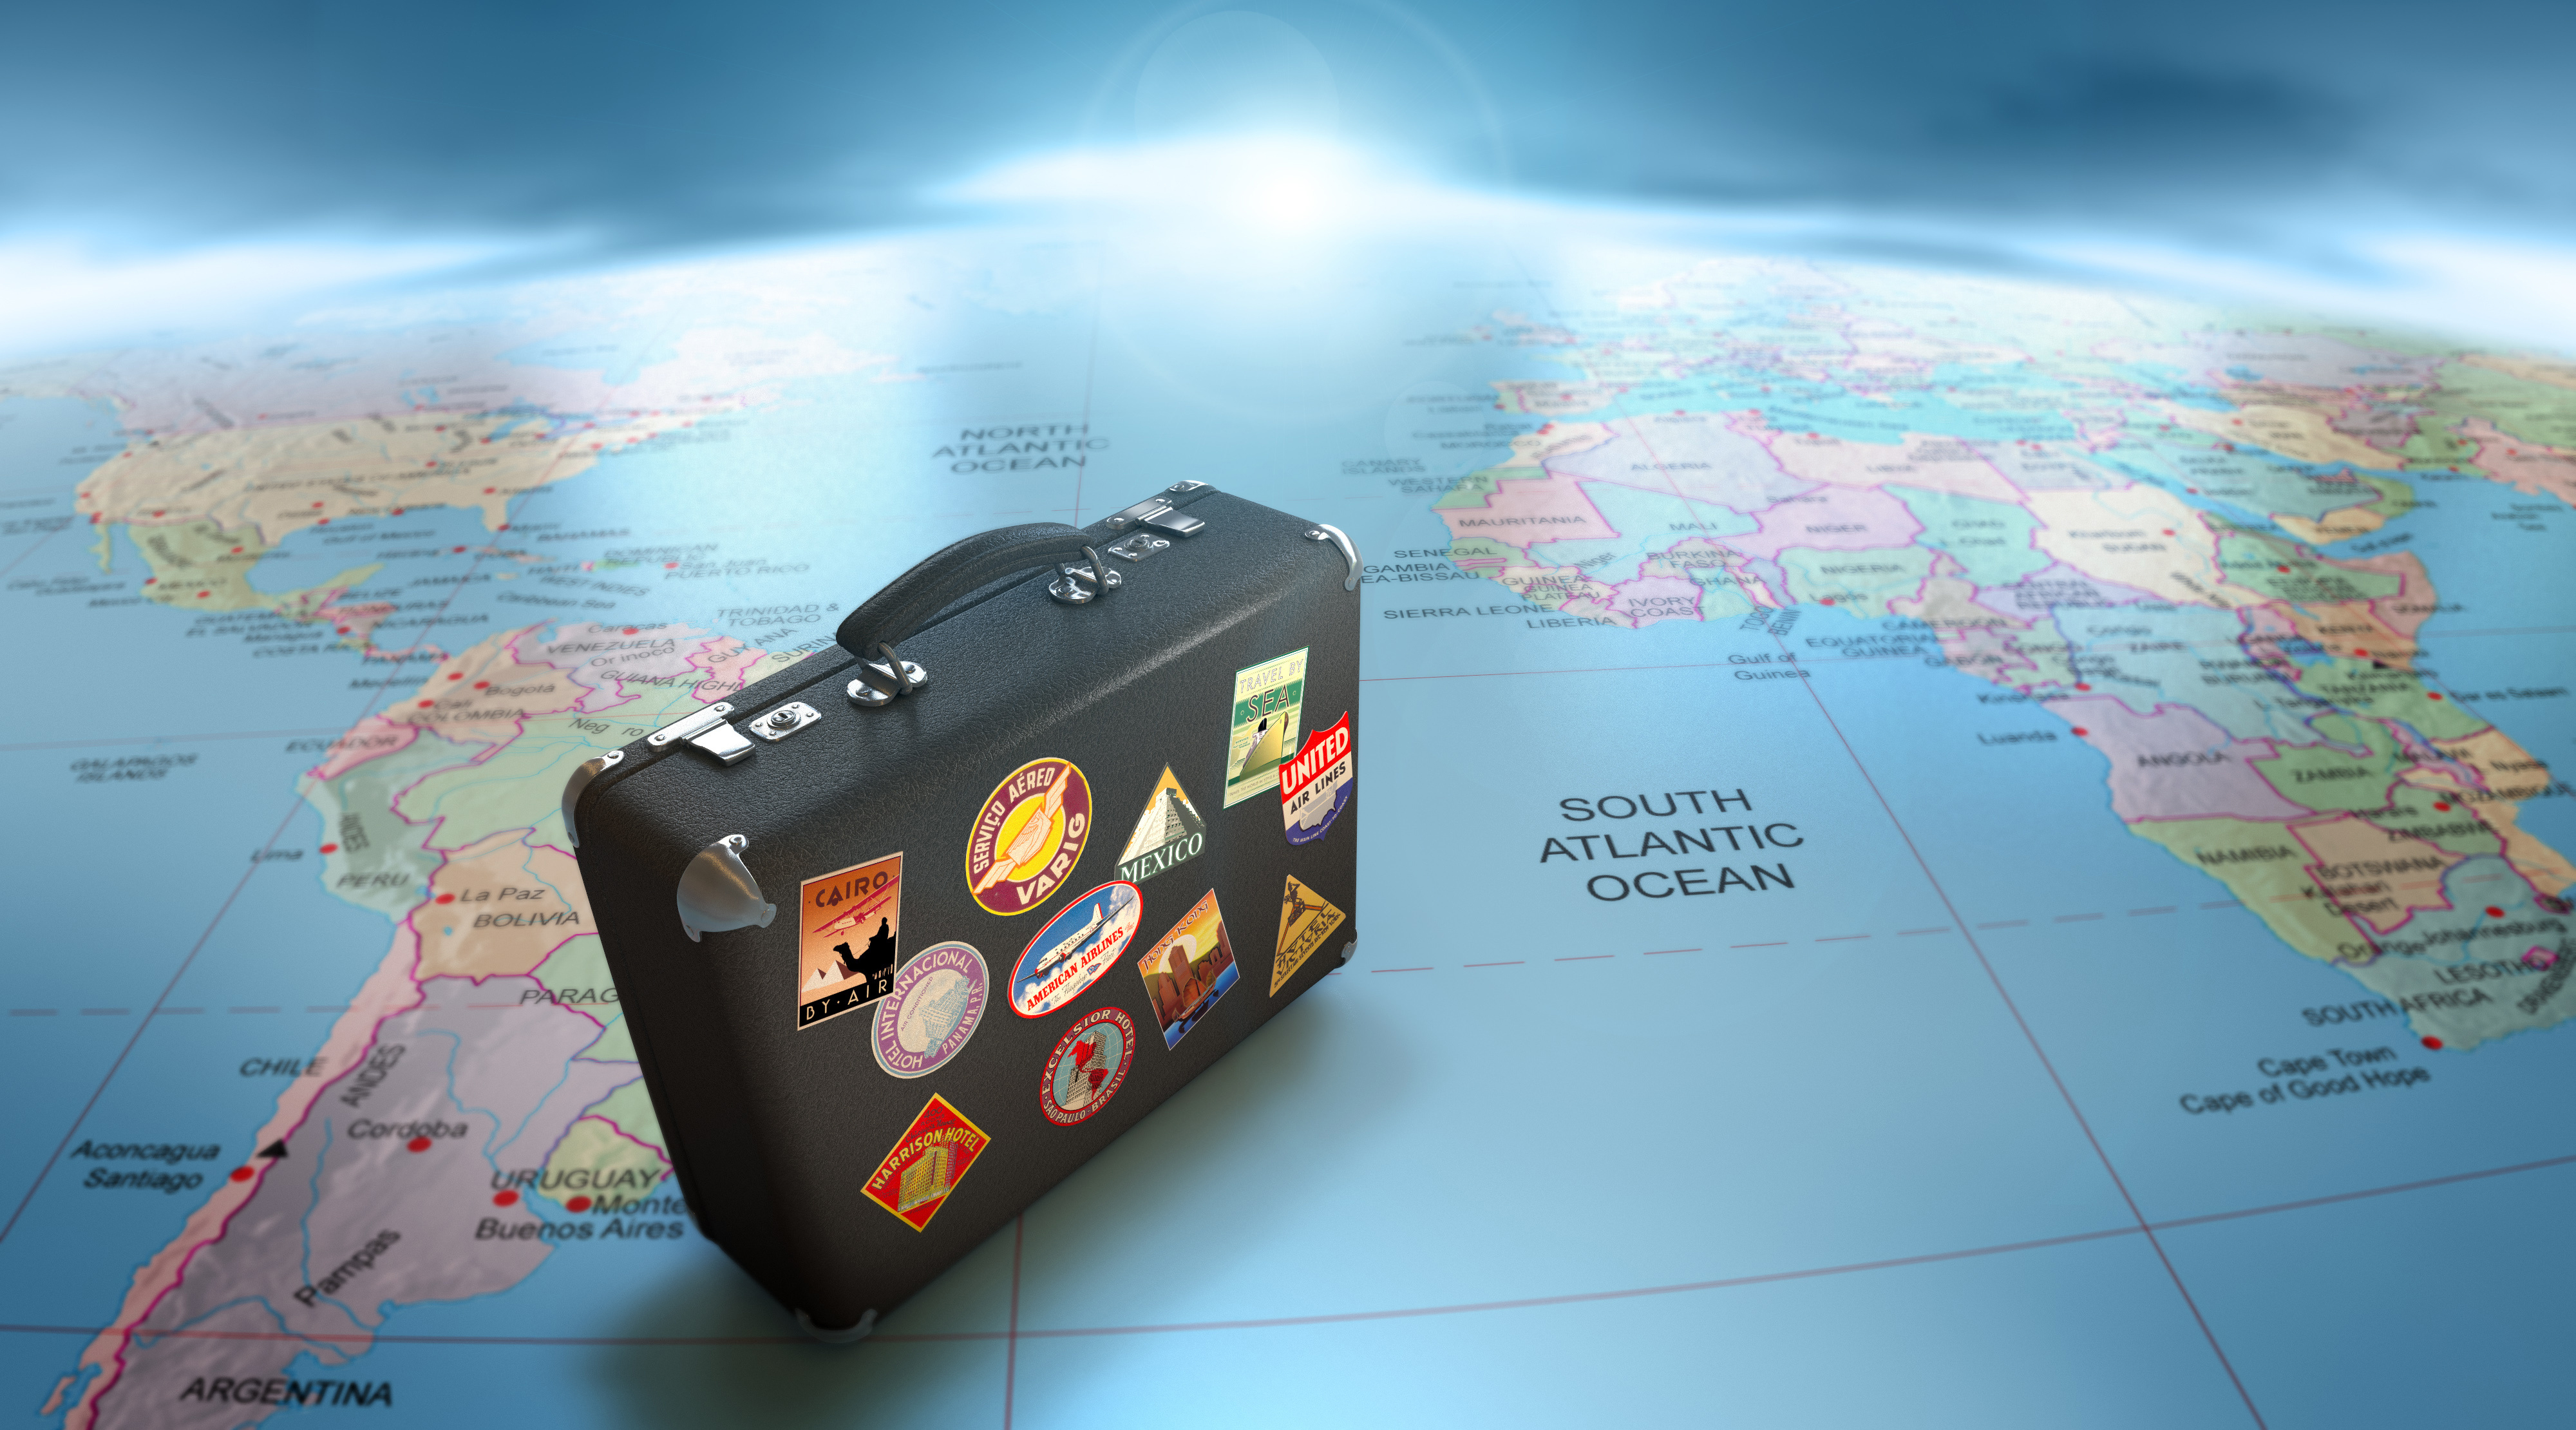 planet, Earth, Globes, Luggage, Suitcase, Stickers, Continents, South America, Africa, North America, Lights, World map, Render Wallpaper